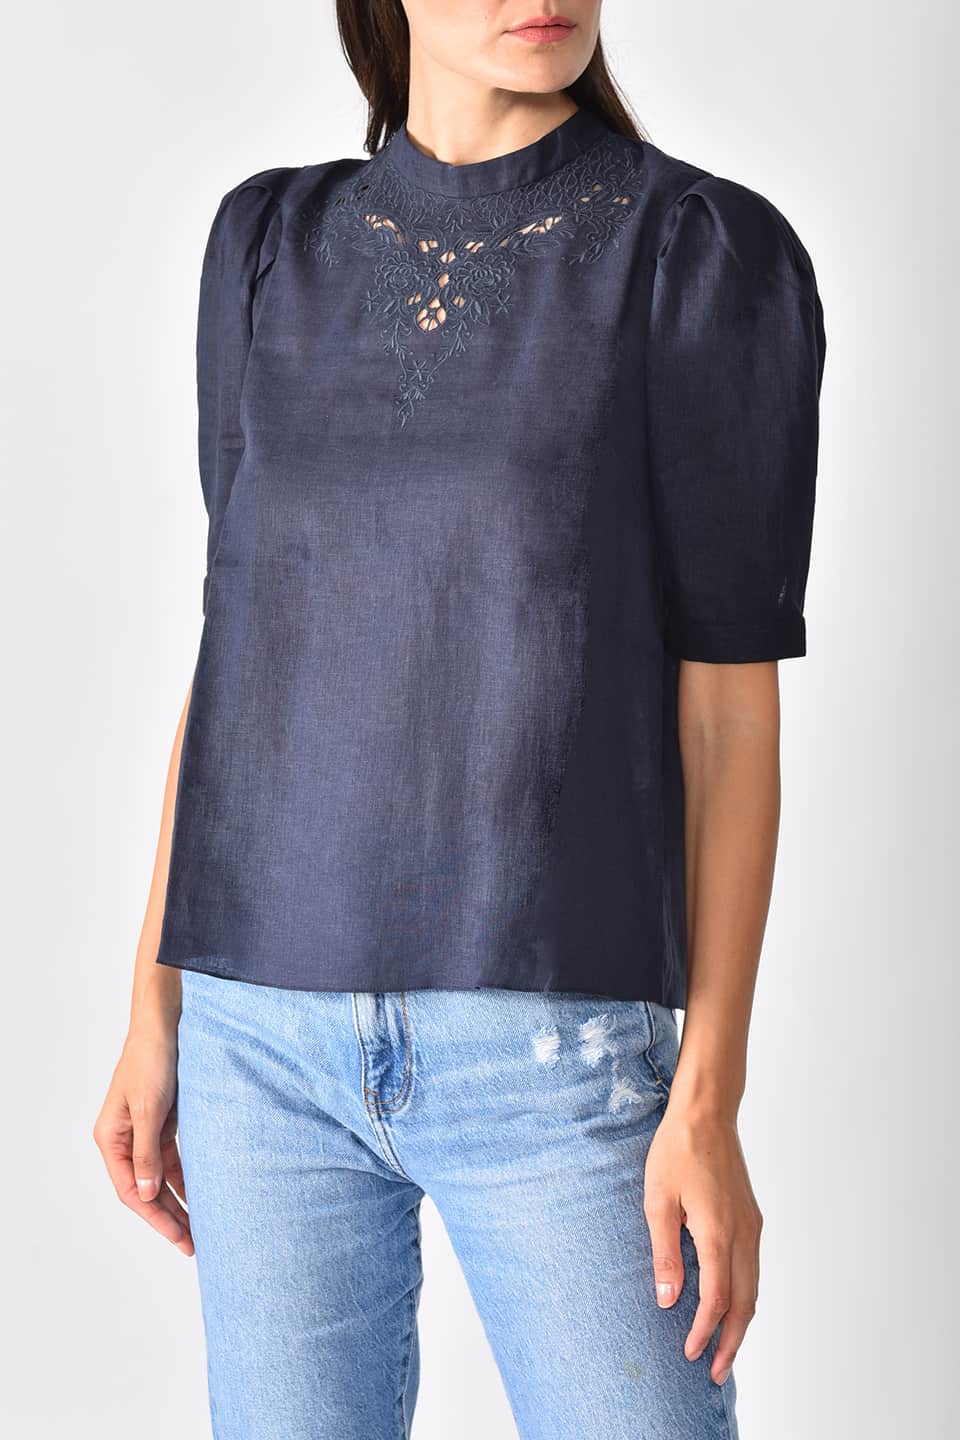 Thumbnail for Product gallery 1, Model wears navy linen top with floral cutout embroidery from stylist Vilshenko, posing for front view